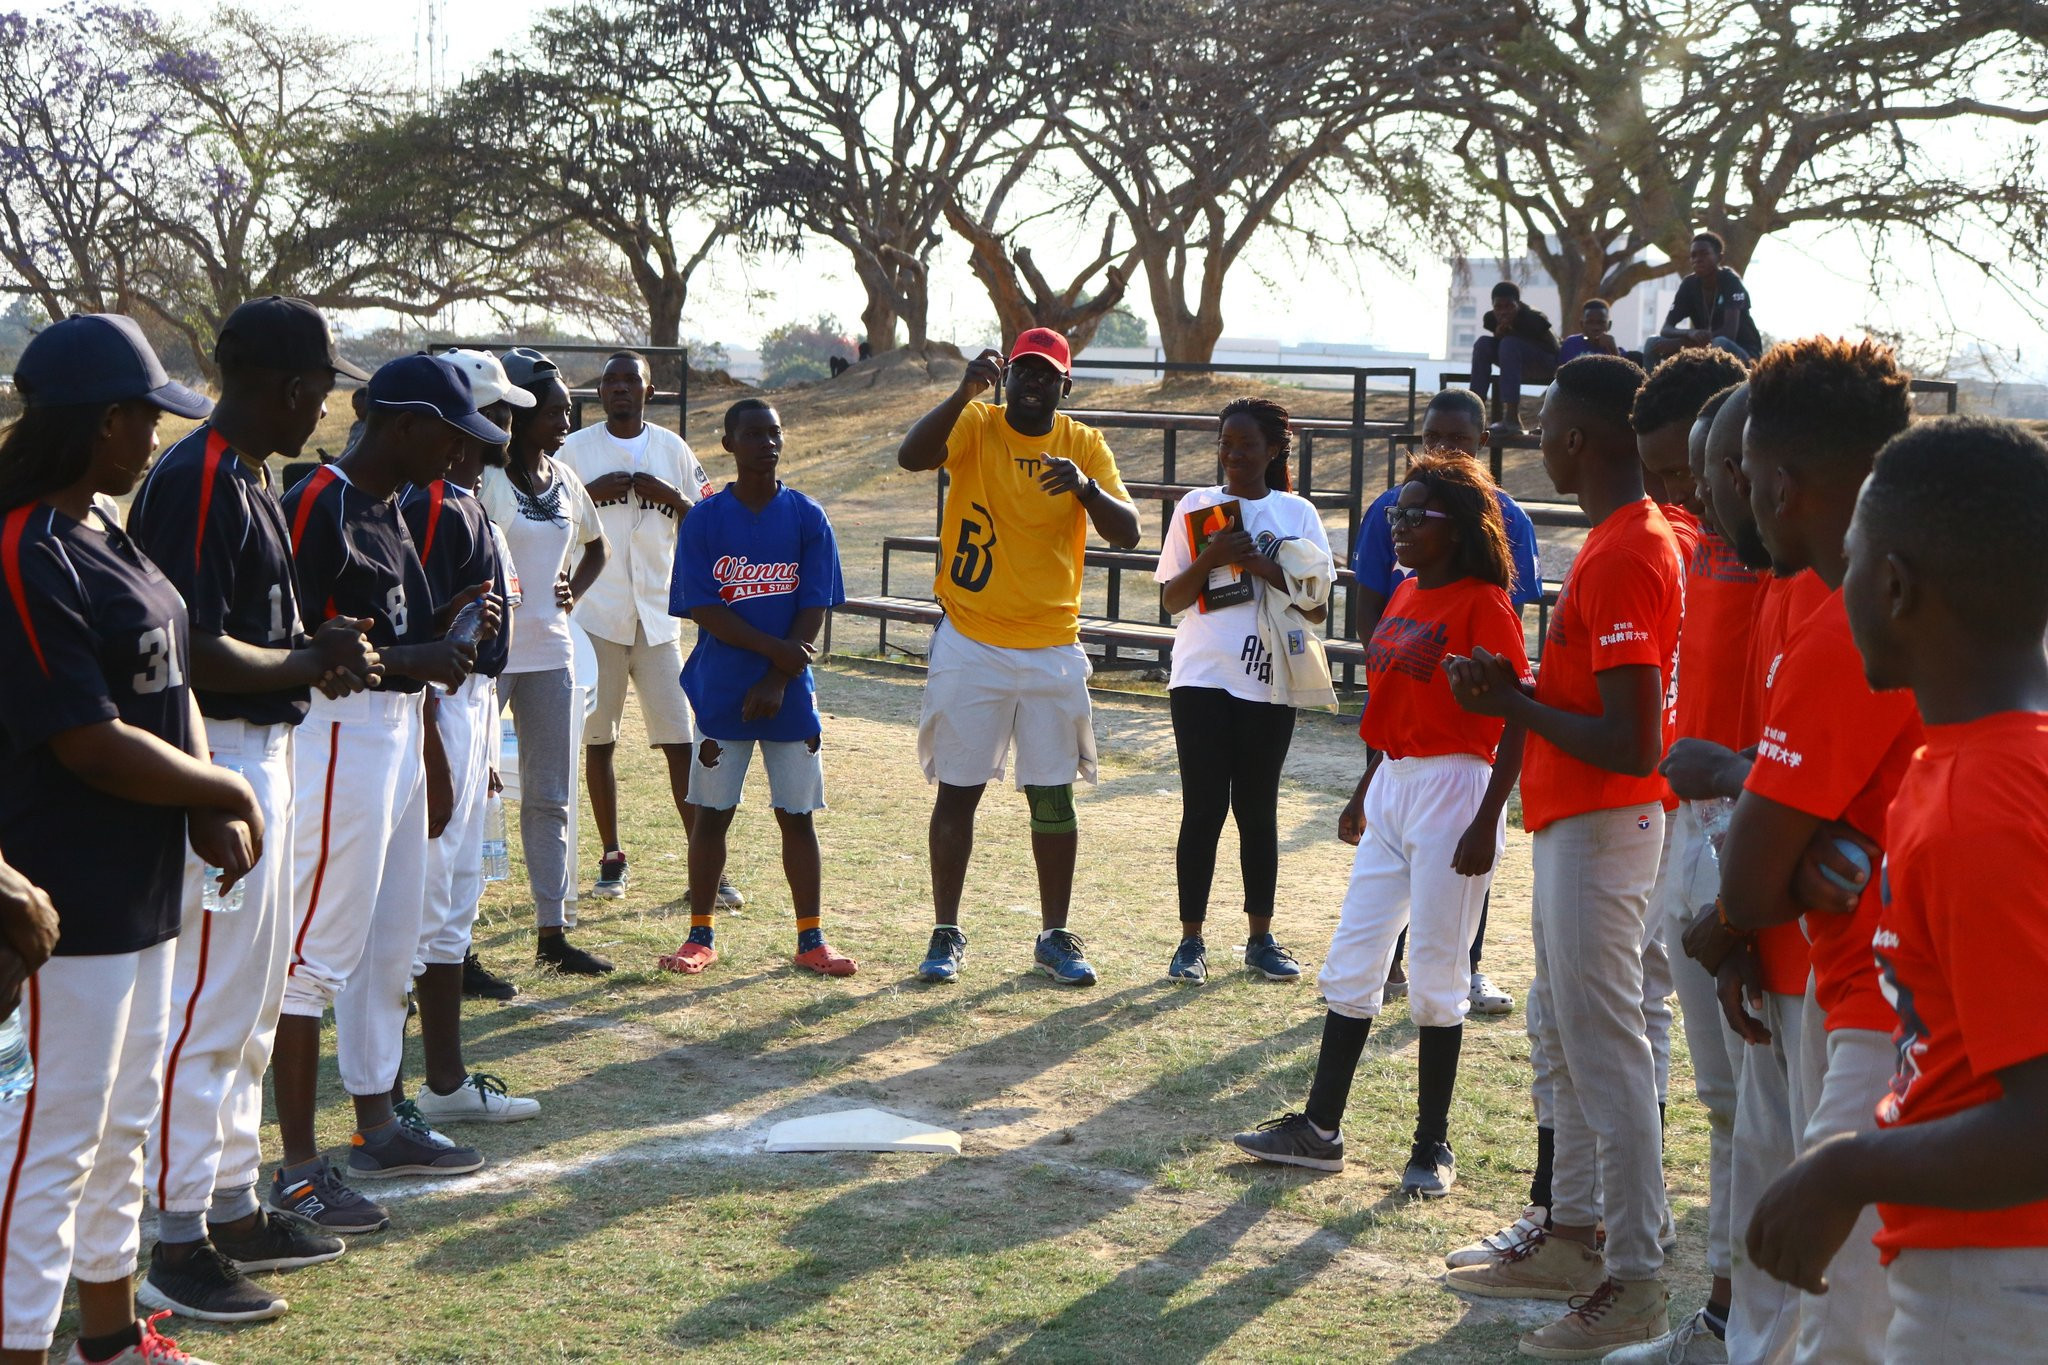 Copperbelt Province University won Zambia's first Baseball5 University Championship with a 2-1 victory over hosts the University of Zambia in Lusaka on a converted rugby field ©WBSC